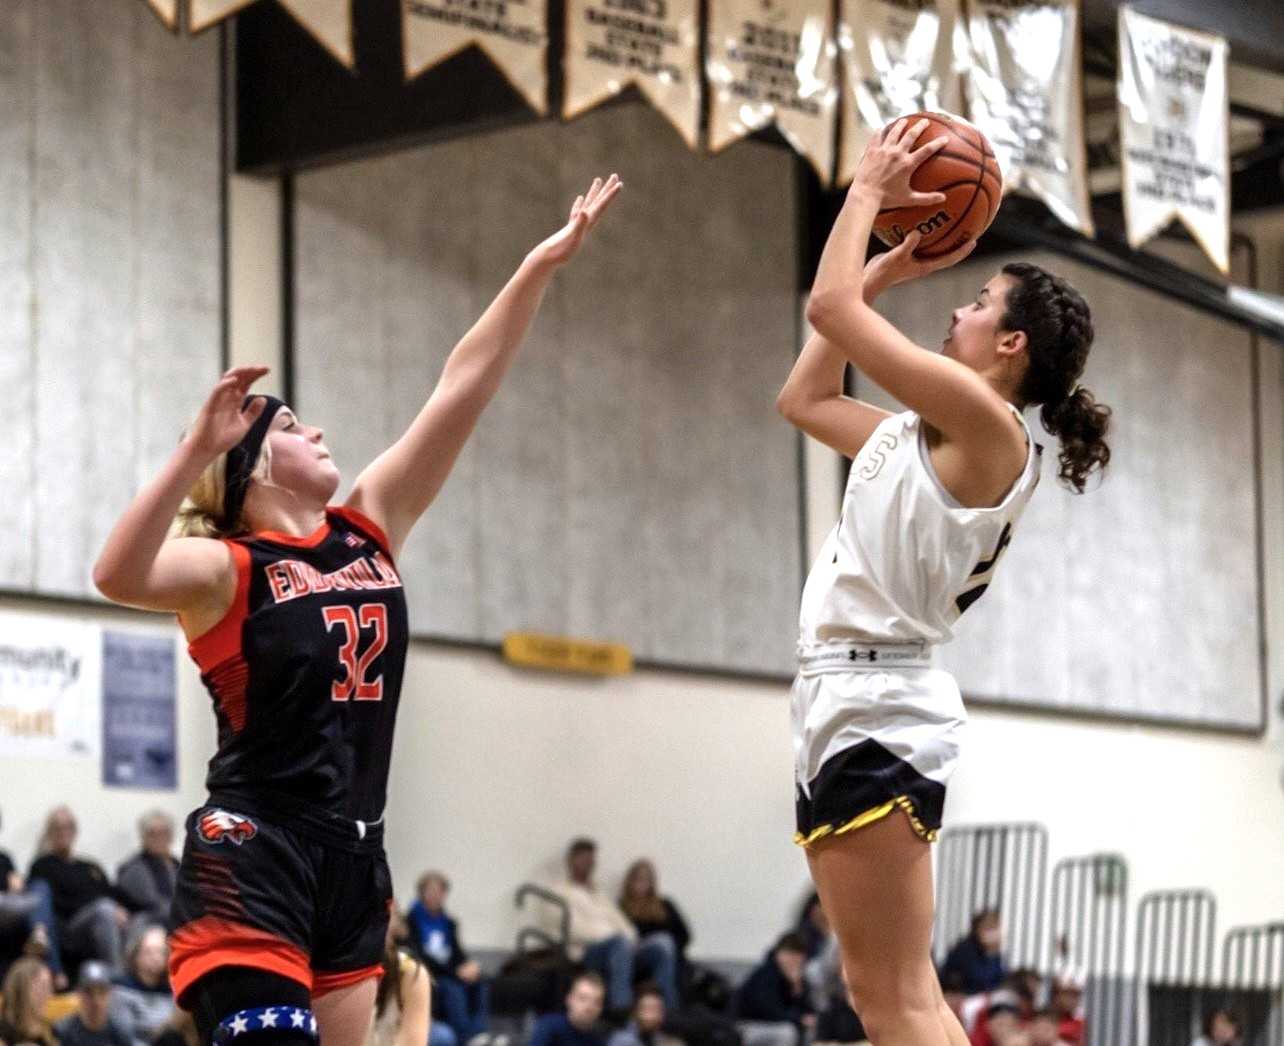 Bandon senior guard Katelyn Senn (right) is averaging 16.1 points, 7.5 rebounds and 2.5 assists. (Tom Hutton Photography)